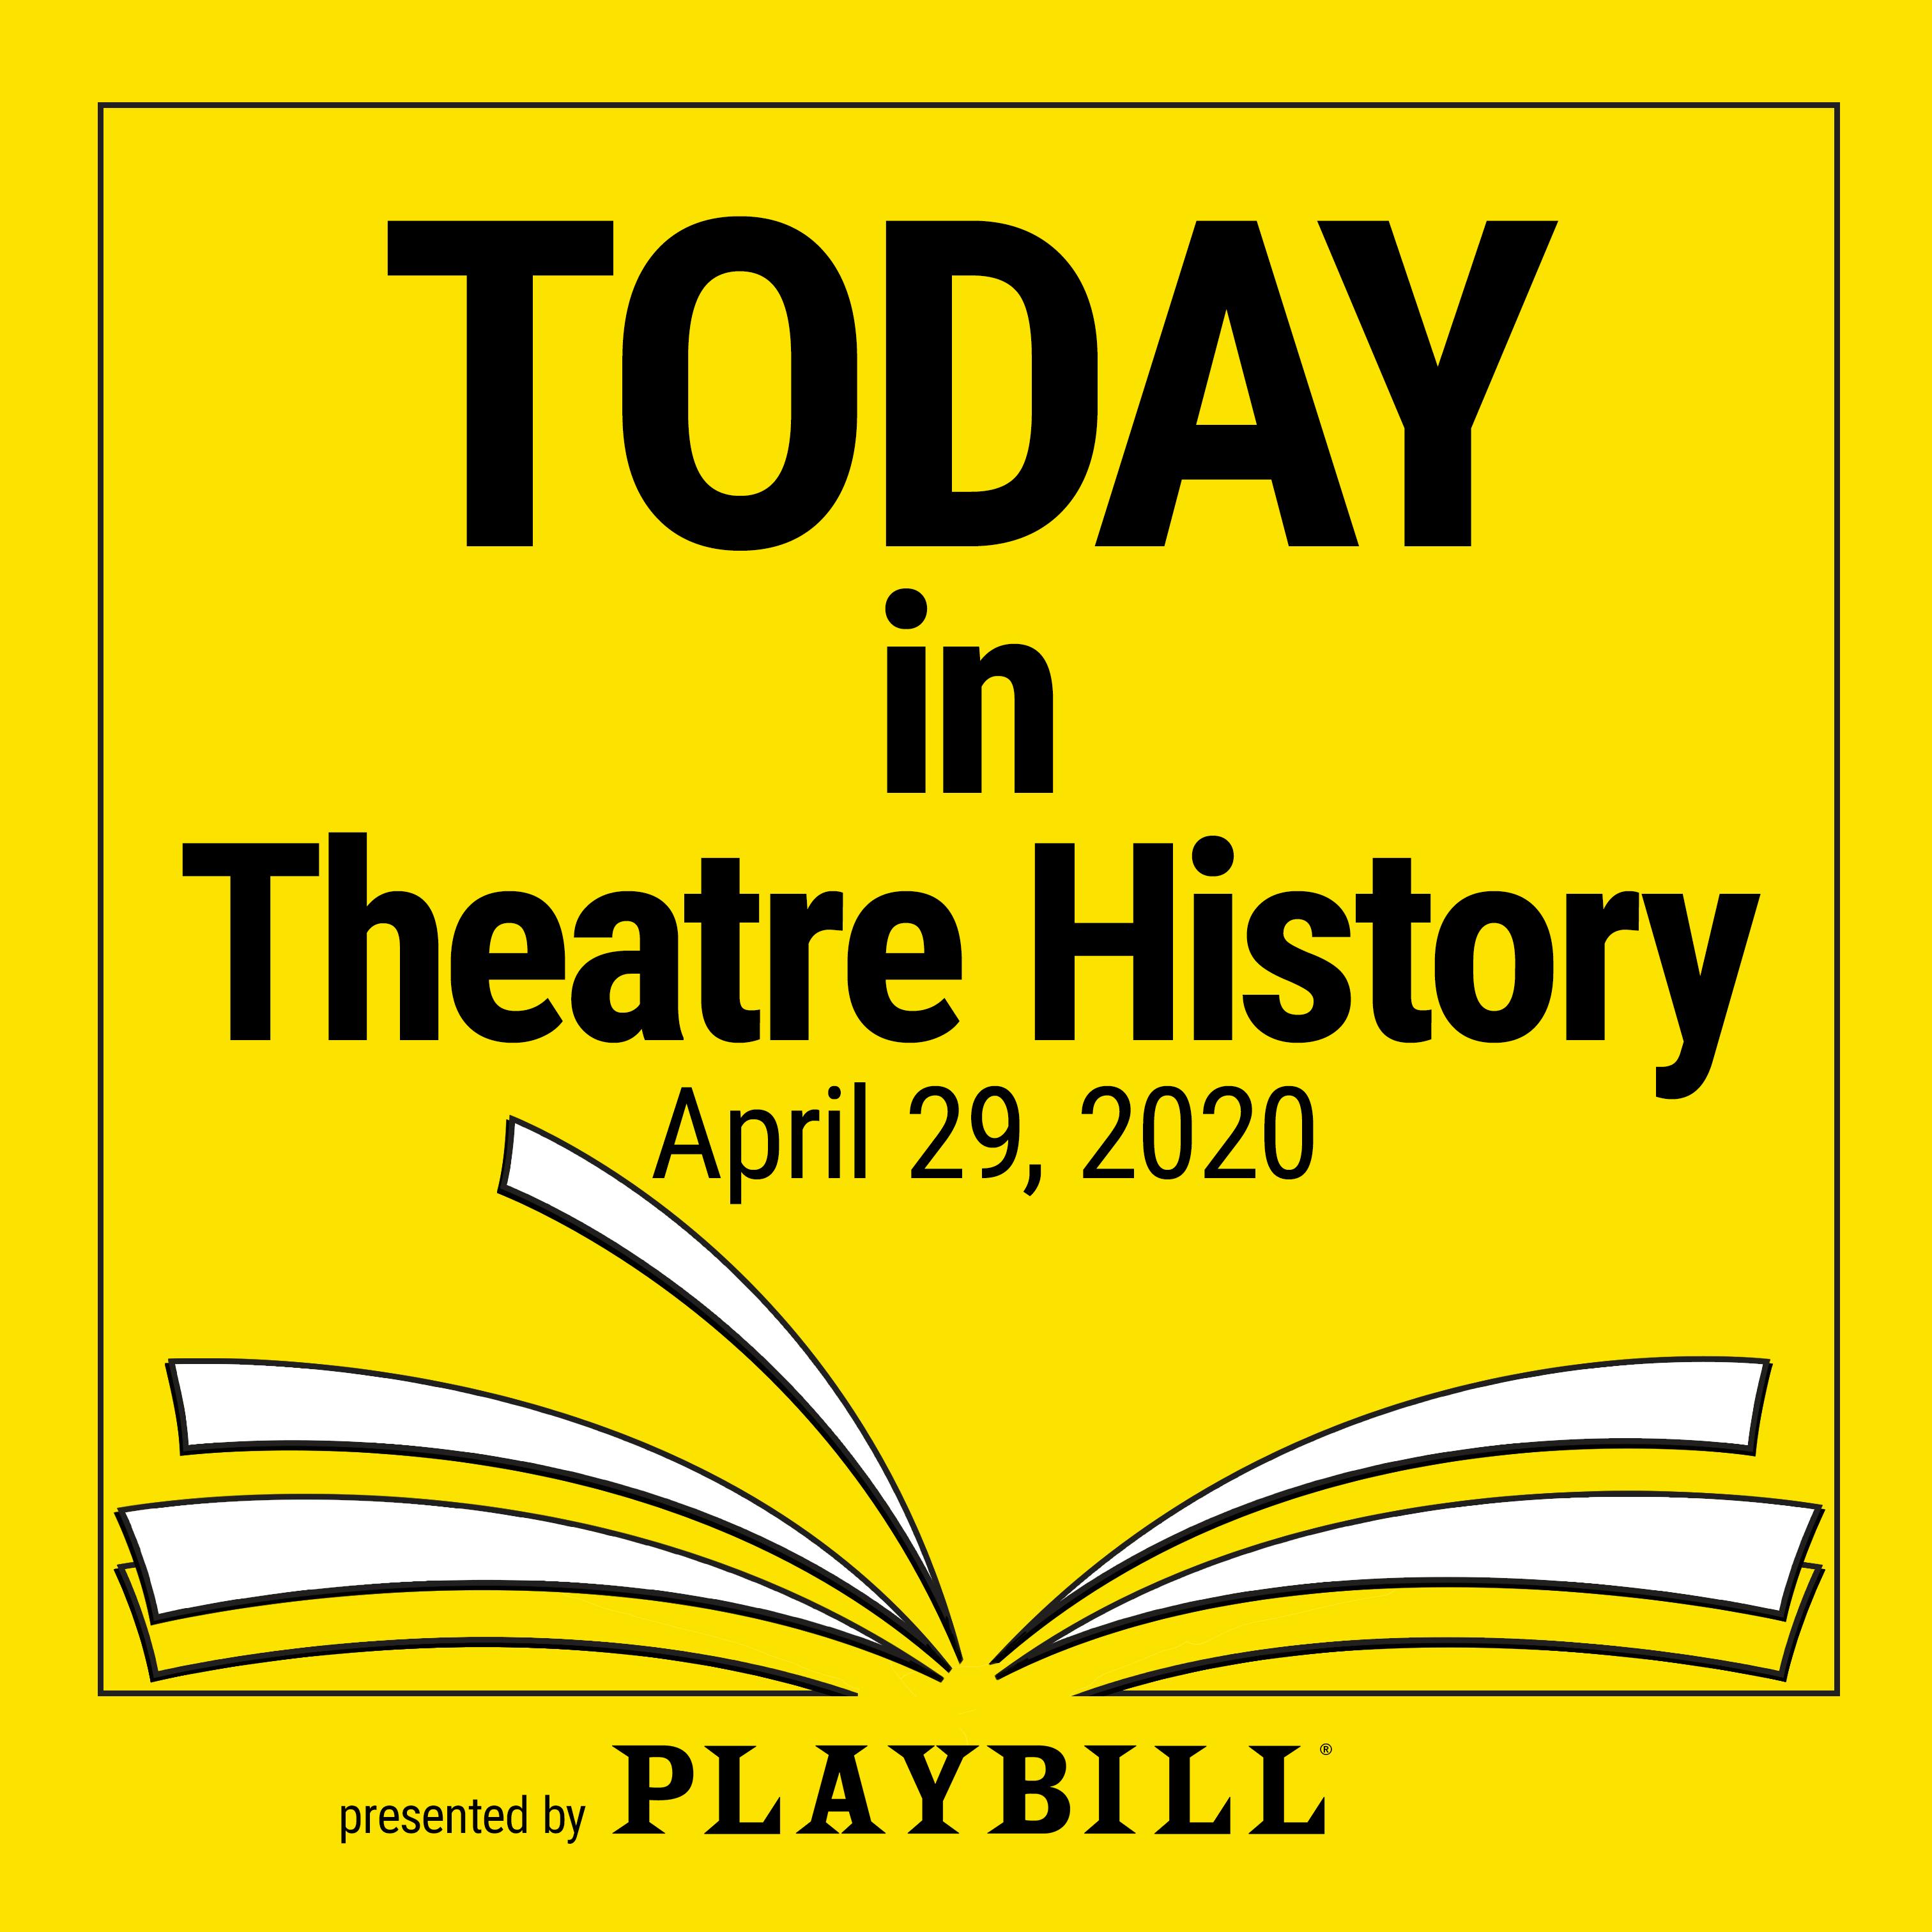 April 29, 2020: Hair, Falsettos, Rent, and other shows with more than one word in their titles opened on Broadway.